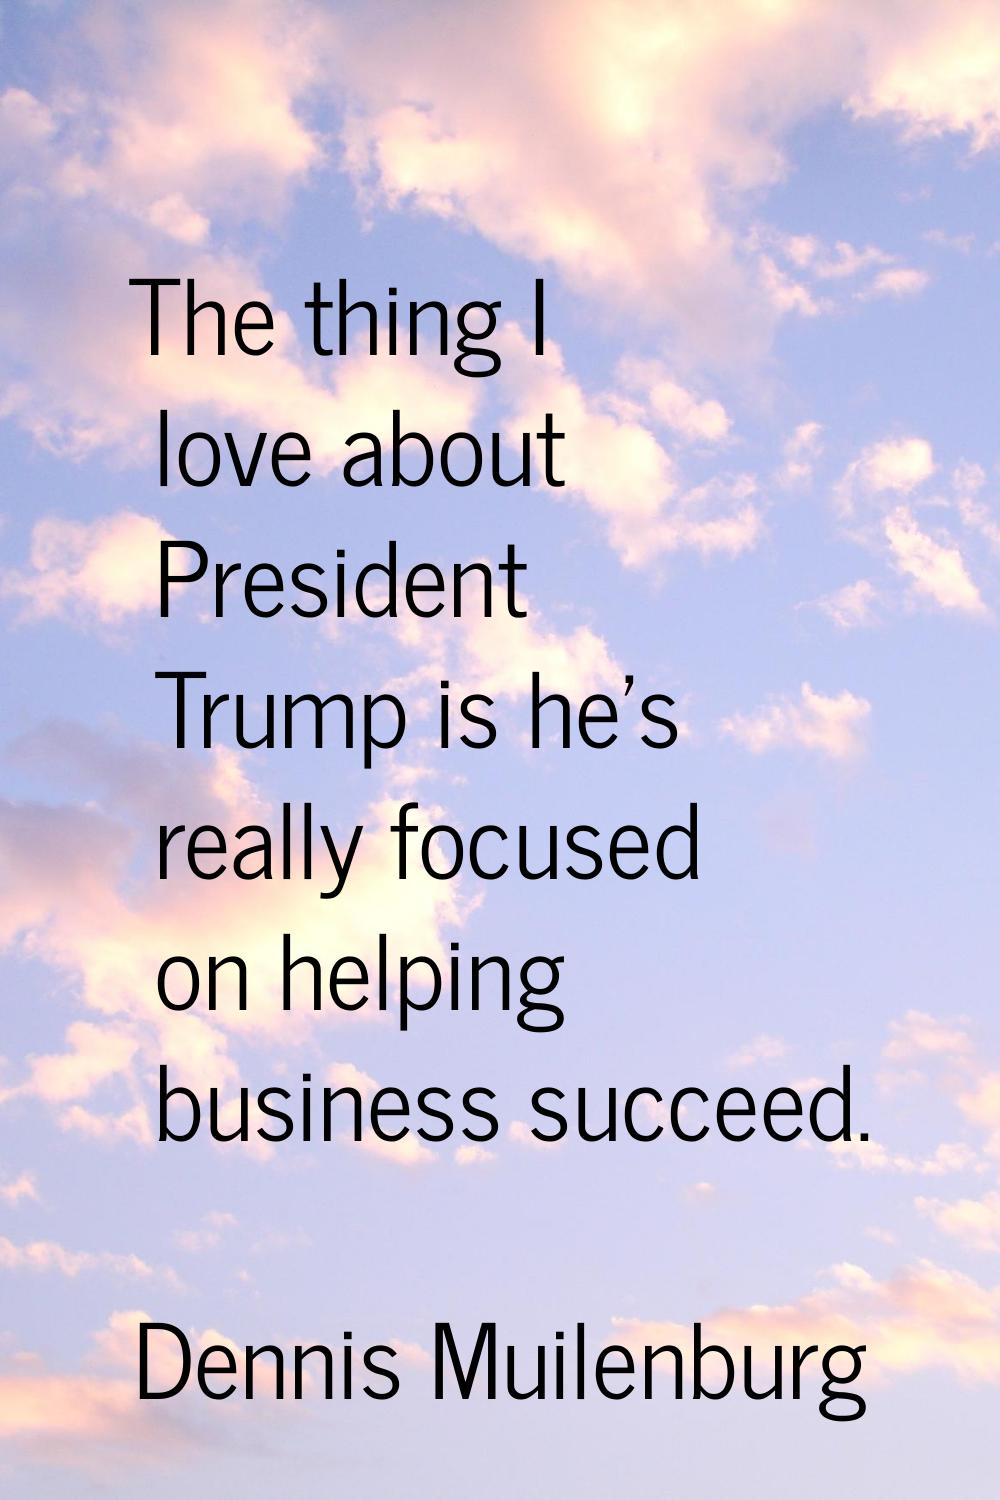 The thing I love about President Trump is he's really focused on helping business succeed.